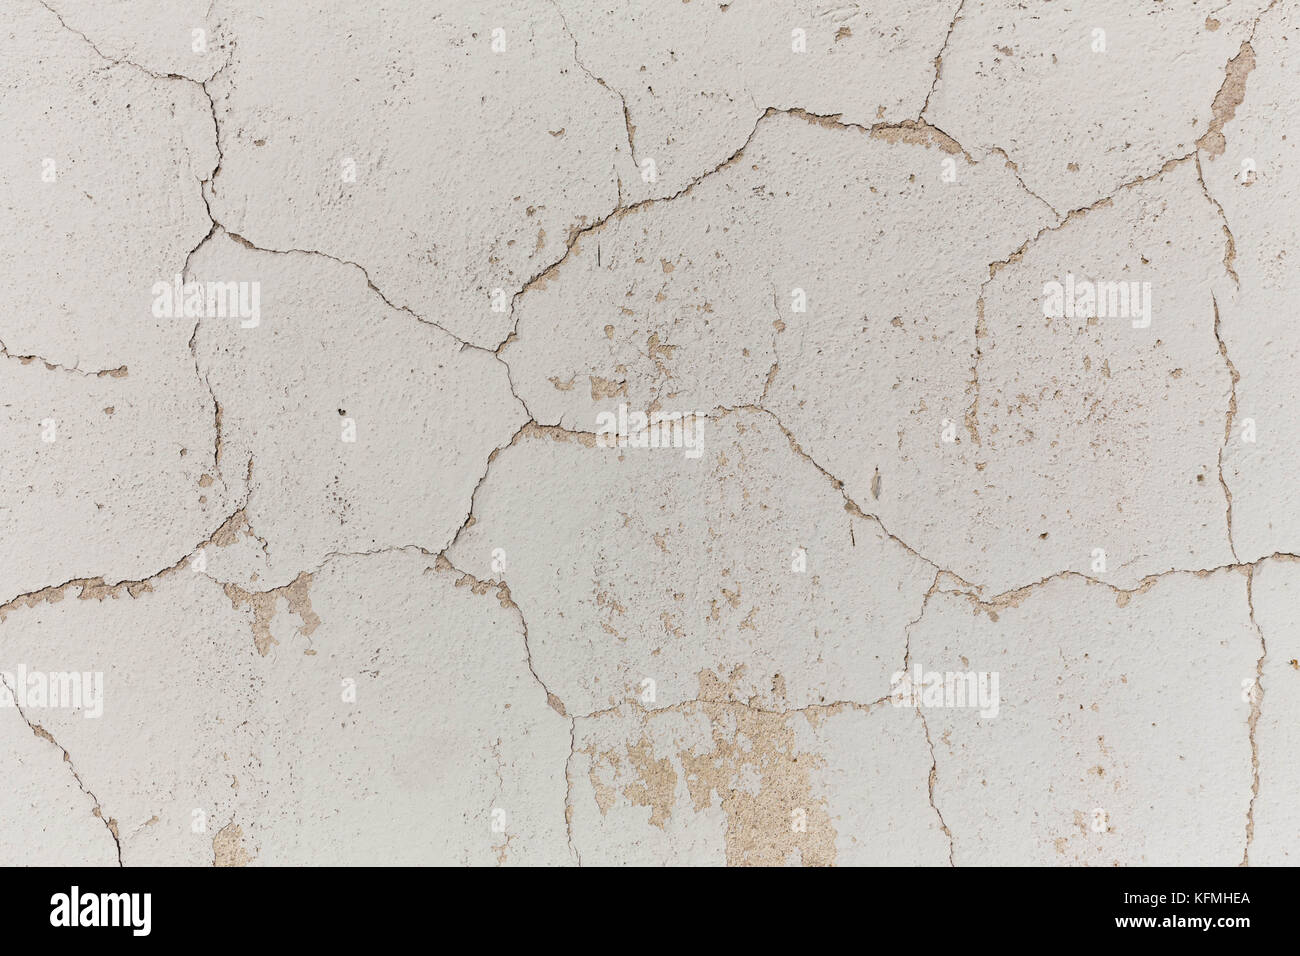 Cracked Walls Of The Building And Flaky Paint Stock Photo 164565922